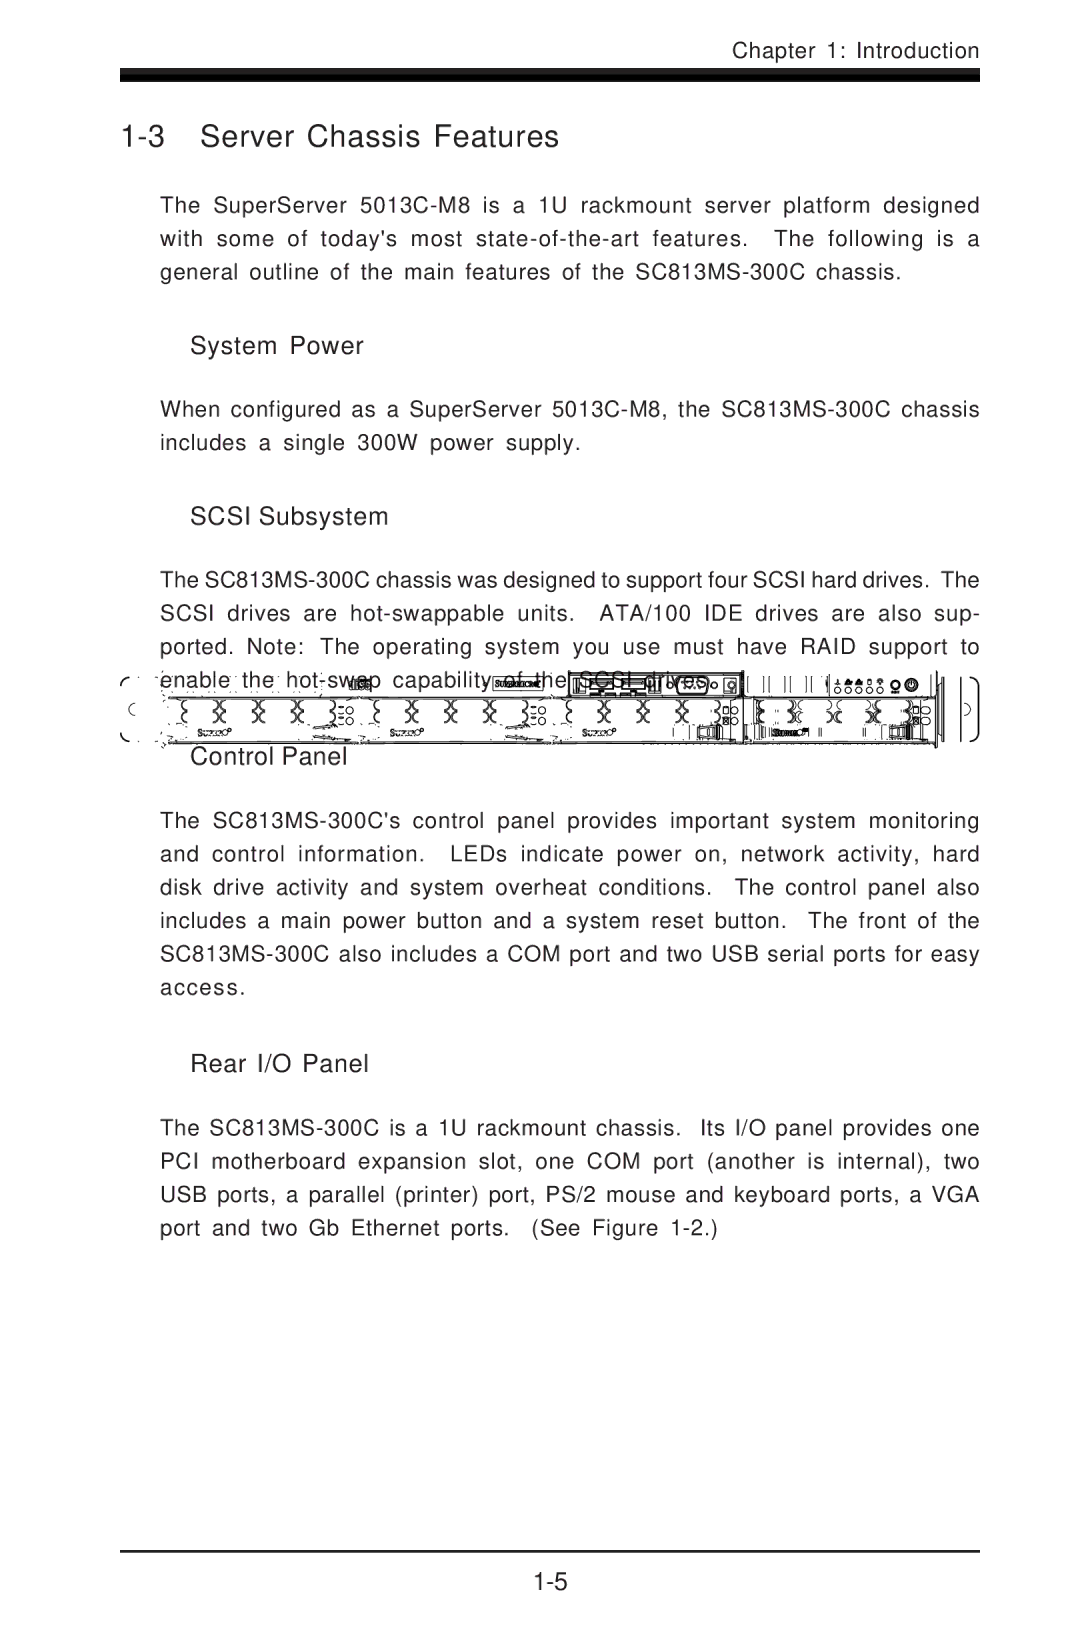 SUPER MICRO Computer 5013C-M8 user manual Server Chassis Features, System Power, Control Panel, Rear I/O Panel 